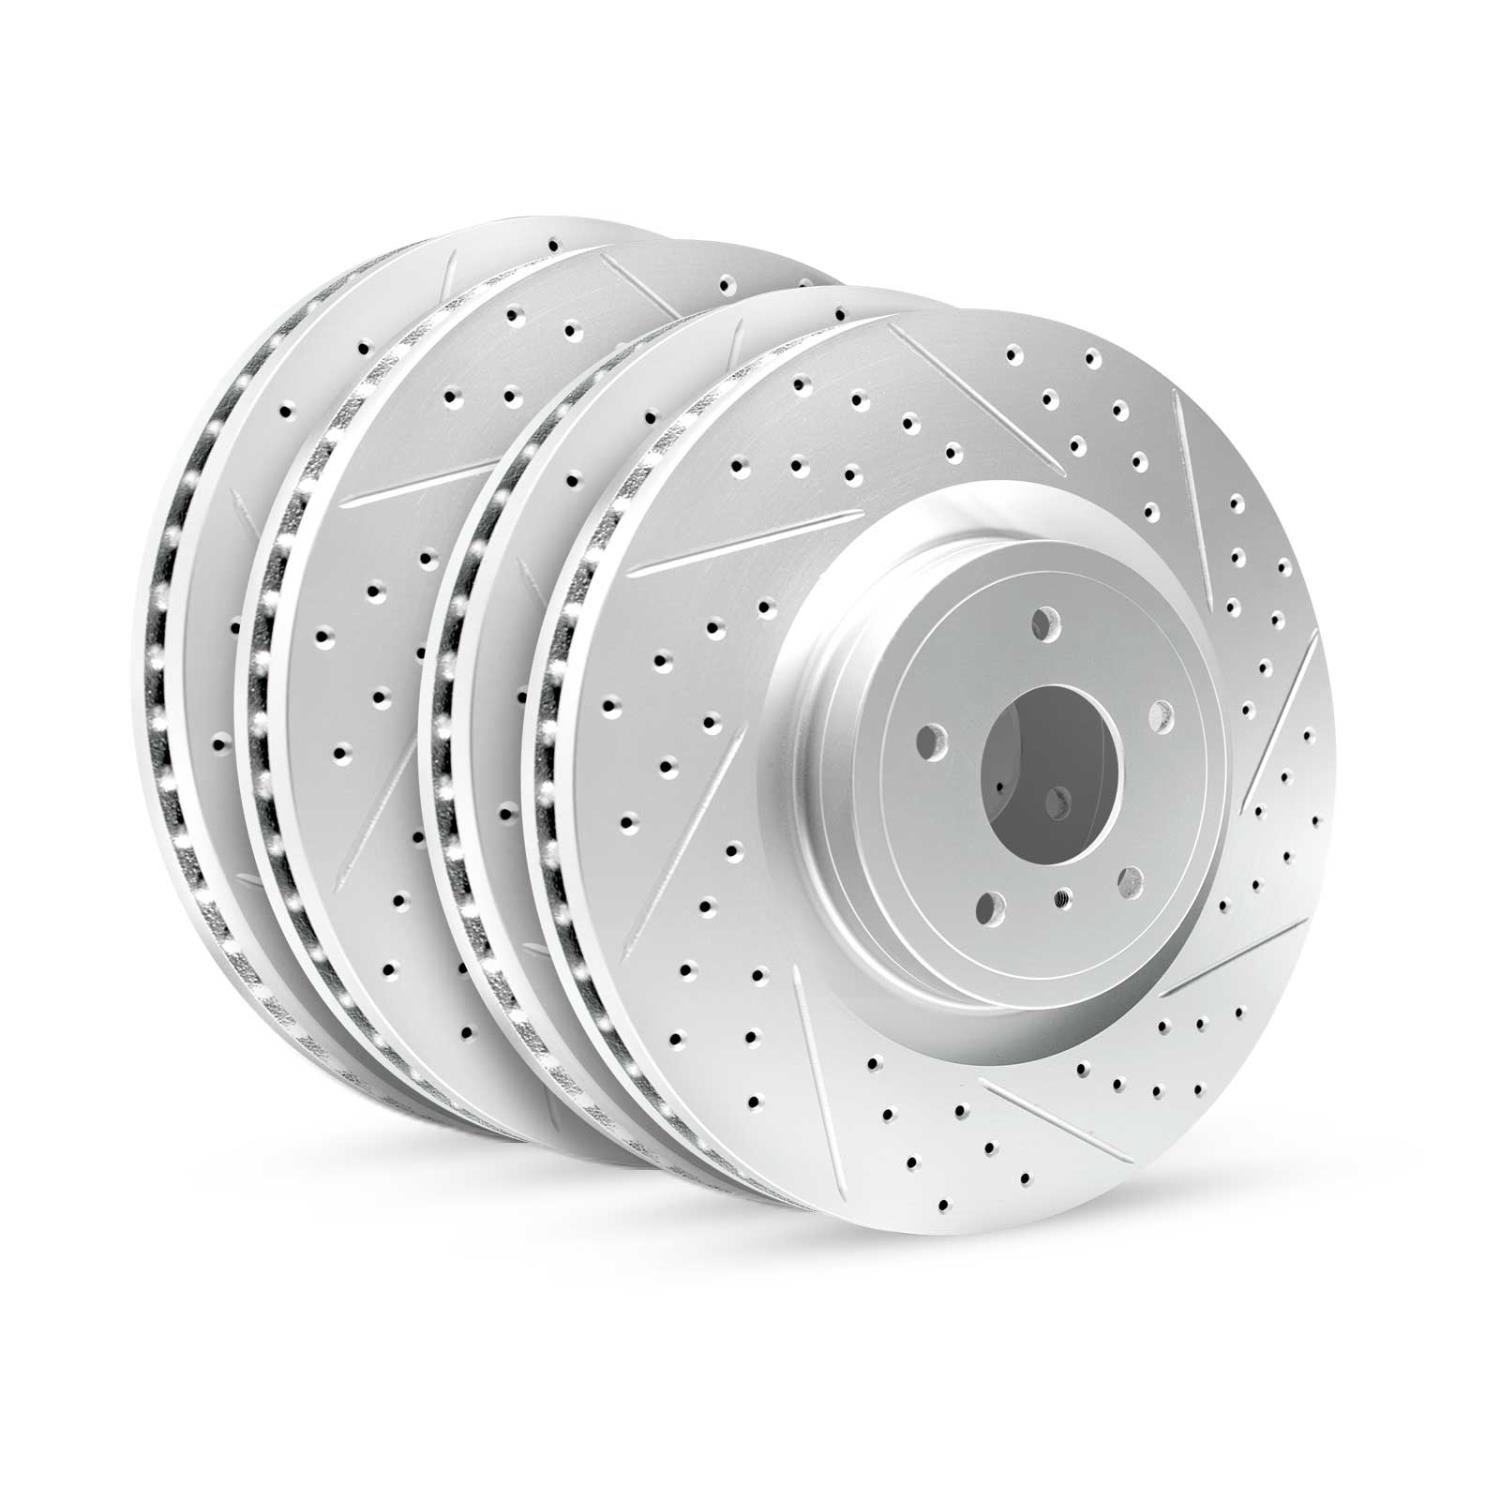 GEO-Carbon Drilled/Slotted Rotors, 2014-2019 Infiniti/Nissan, Position: Front/Rear